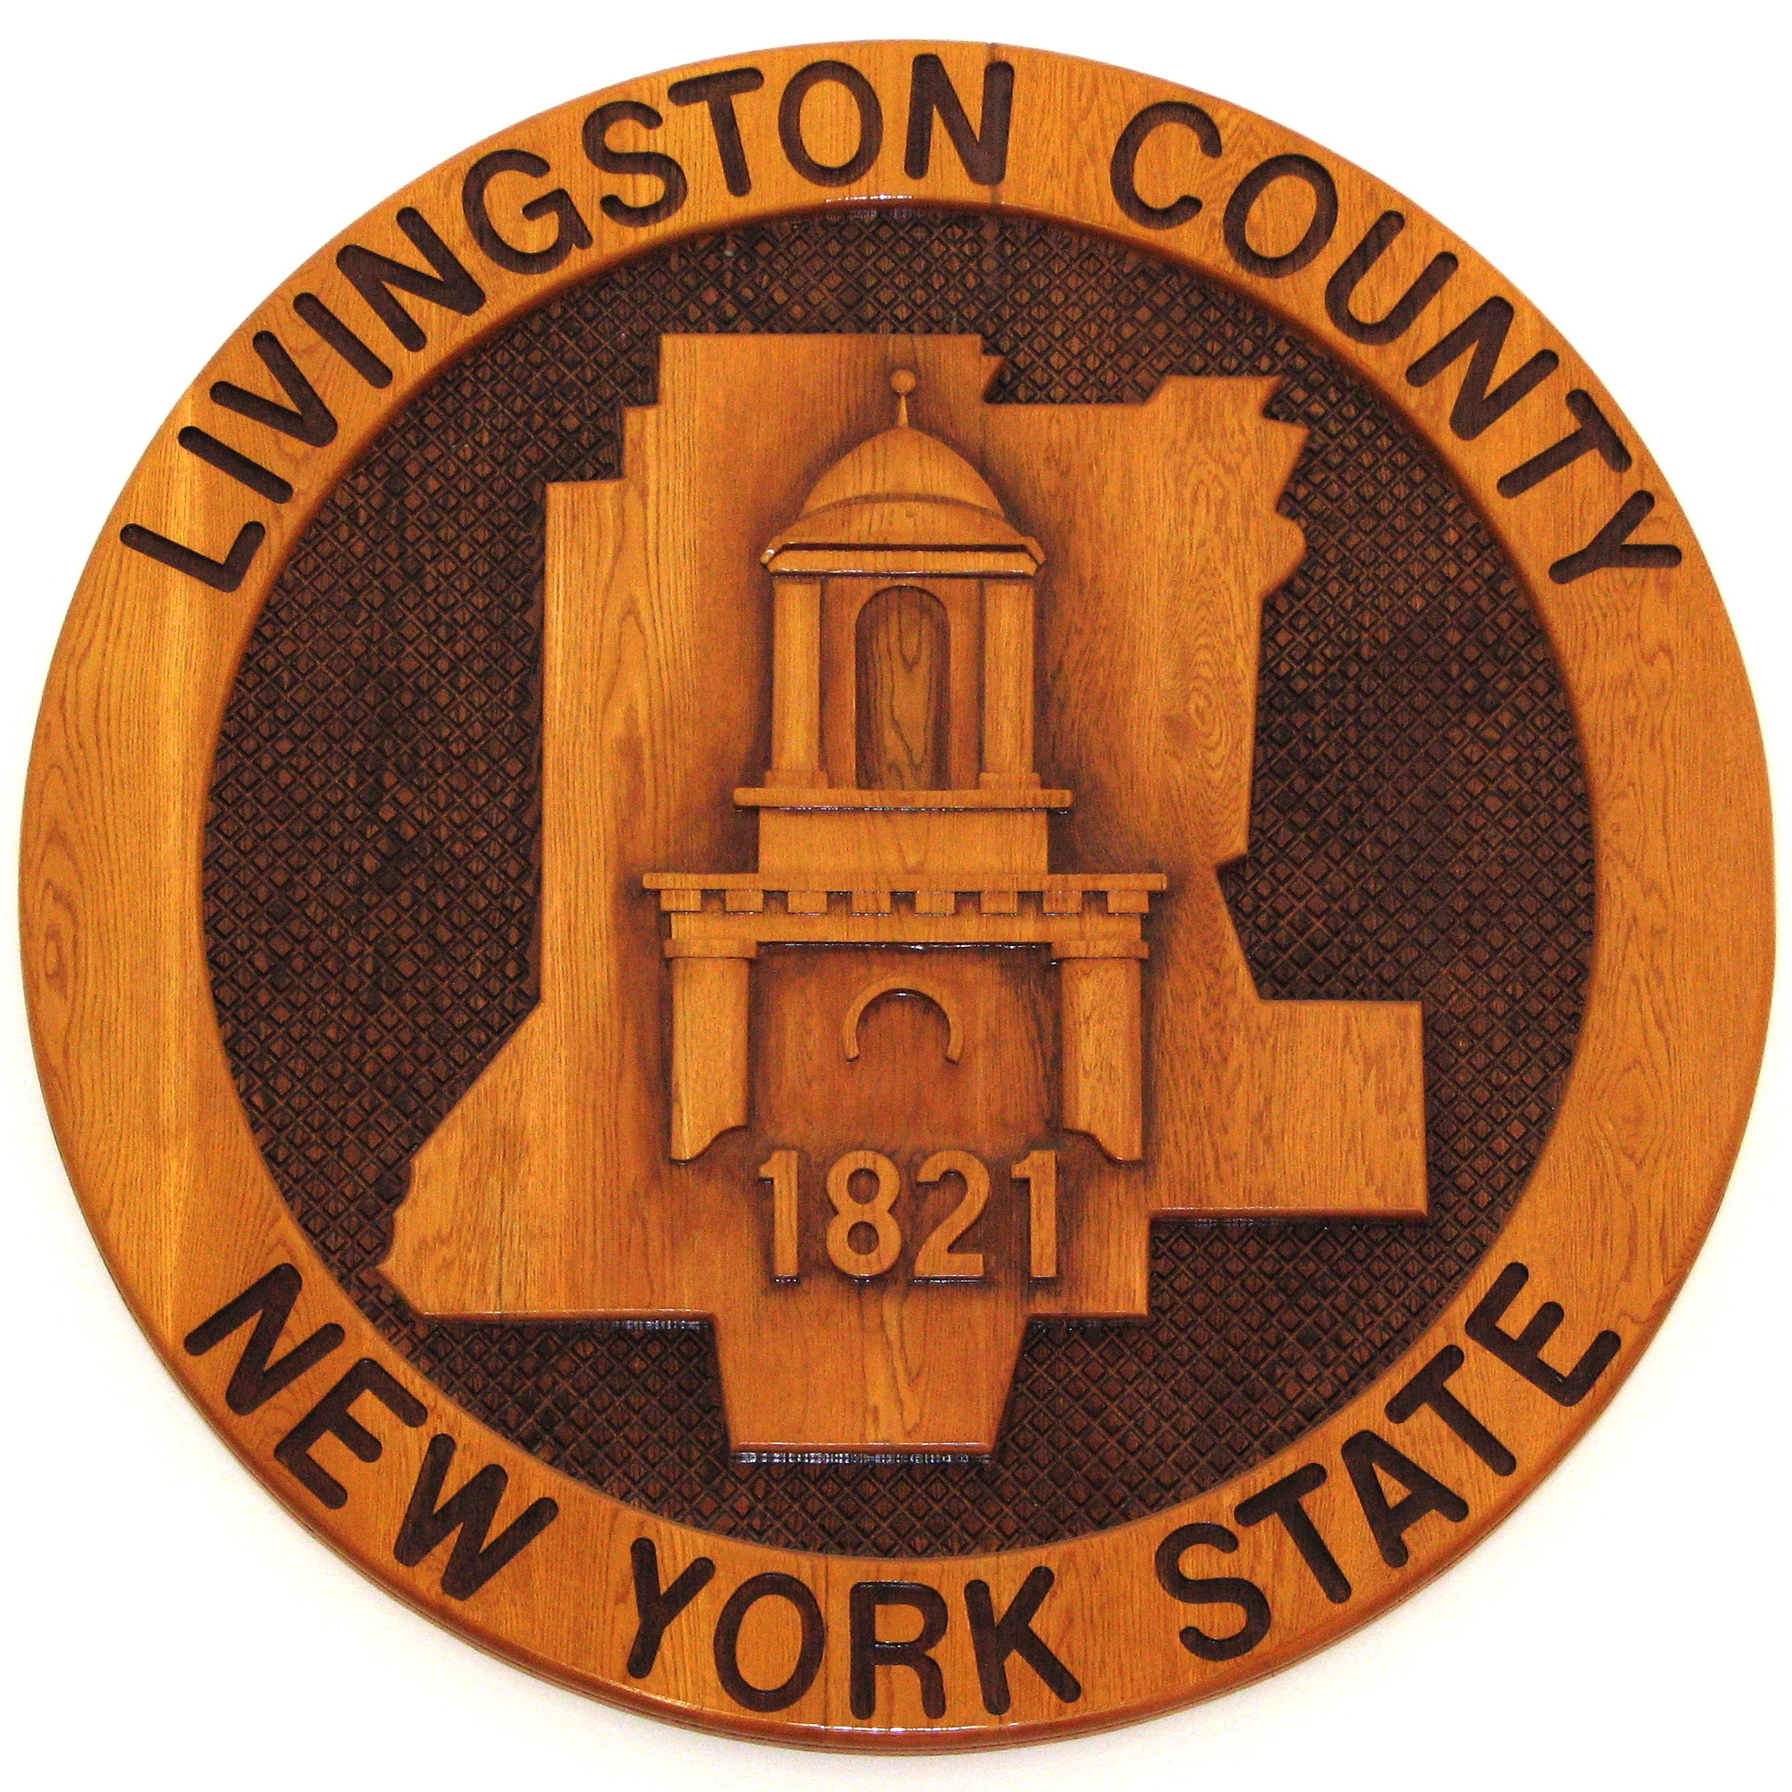 Livingston County Invites Artists To Participate In 2022 Sidewalk